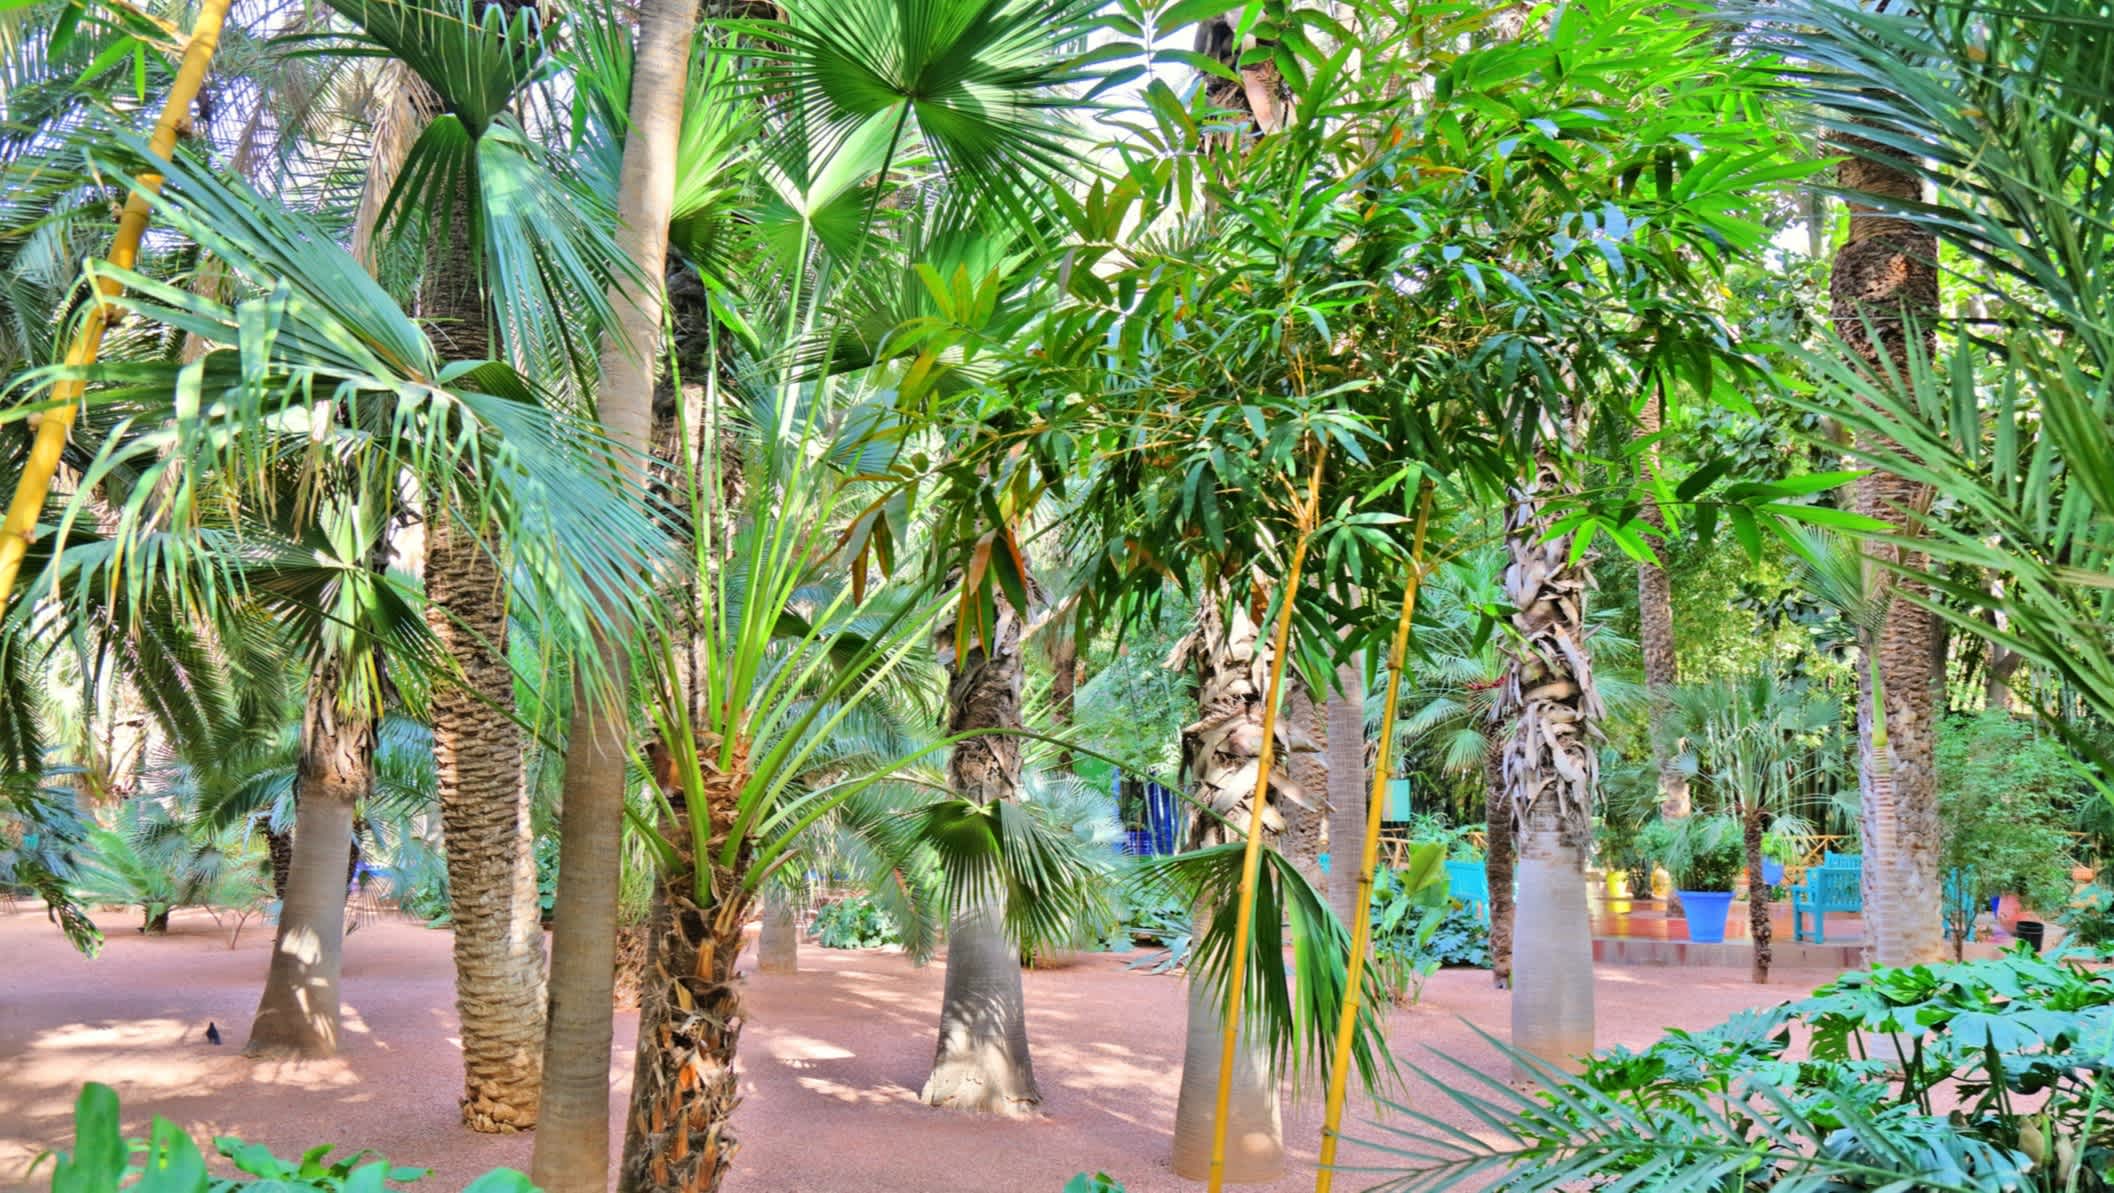  Most beautiful tourist attractions in Morocco: Palm trees in the Majorelle garden in Marrakech